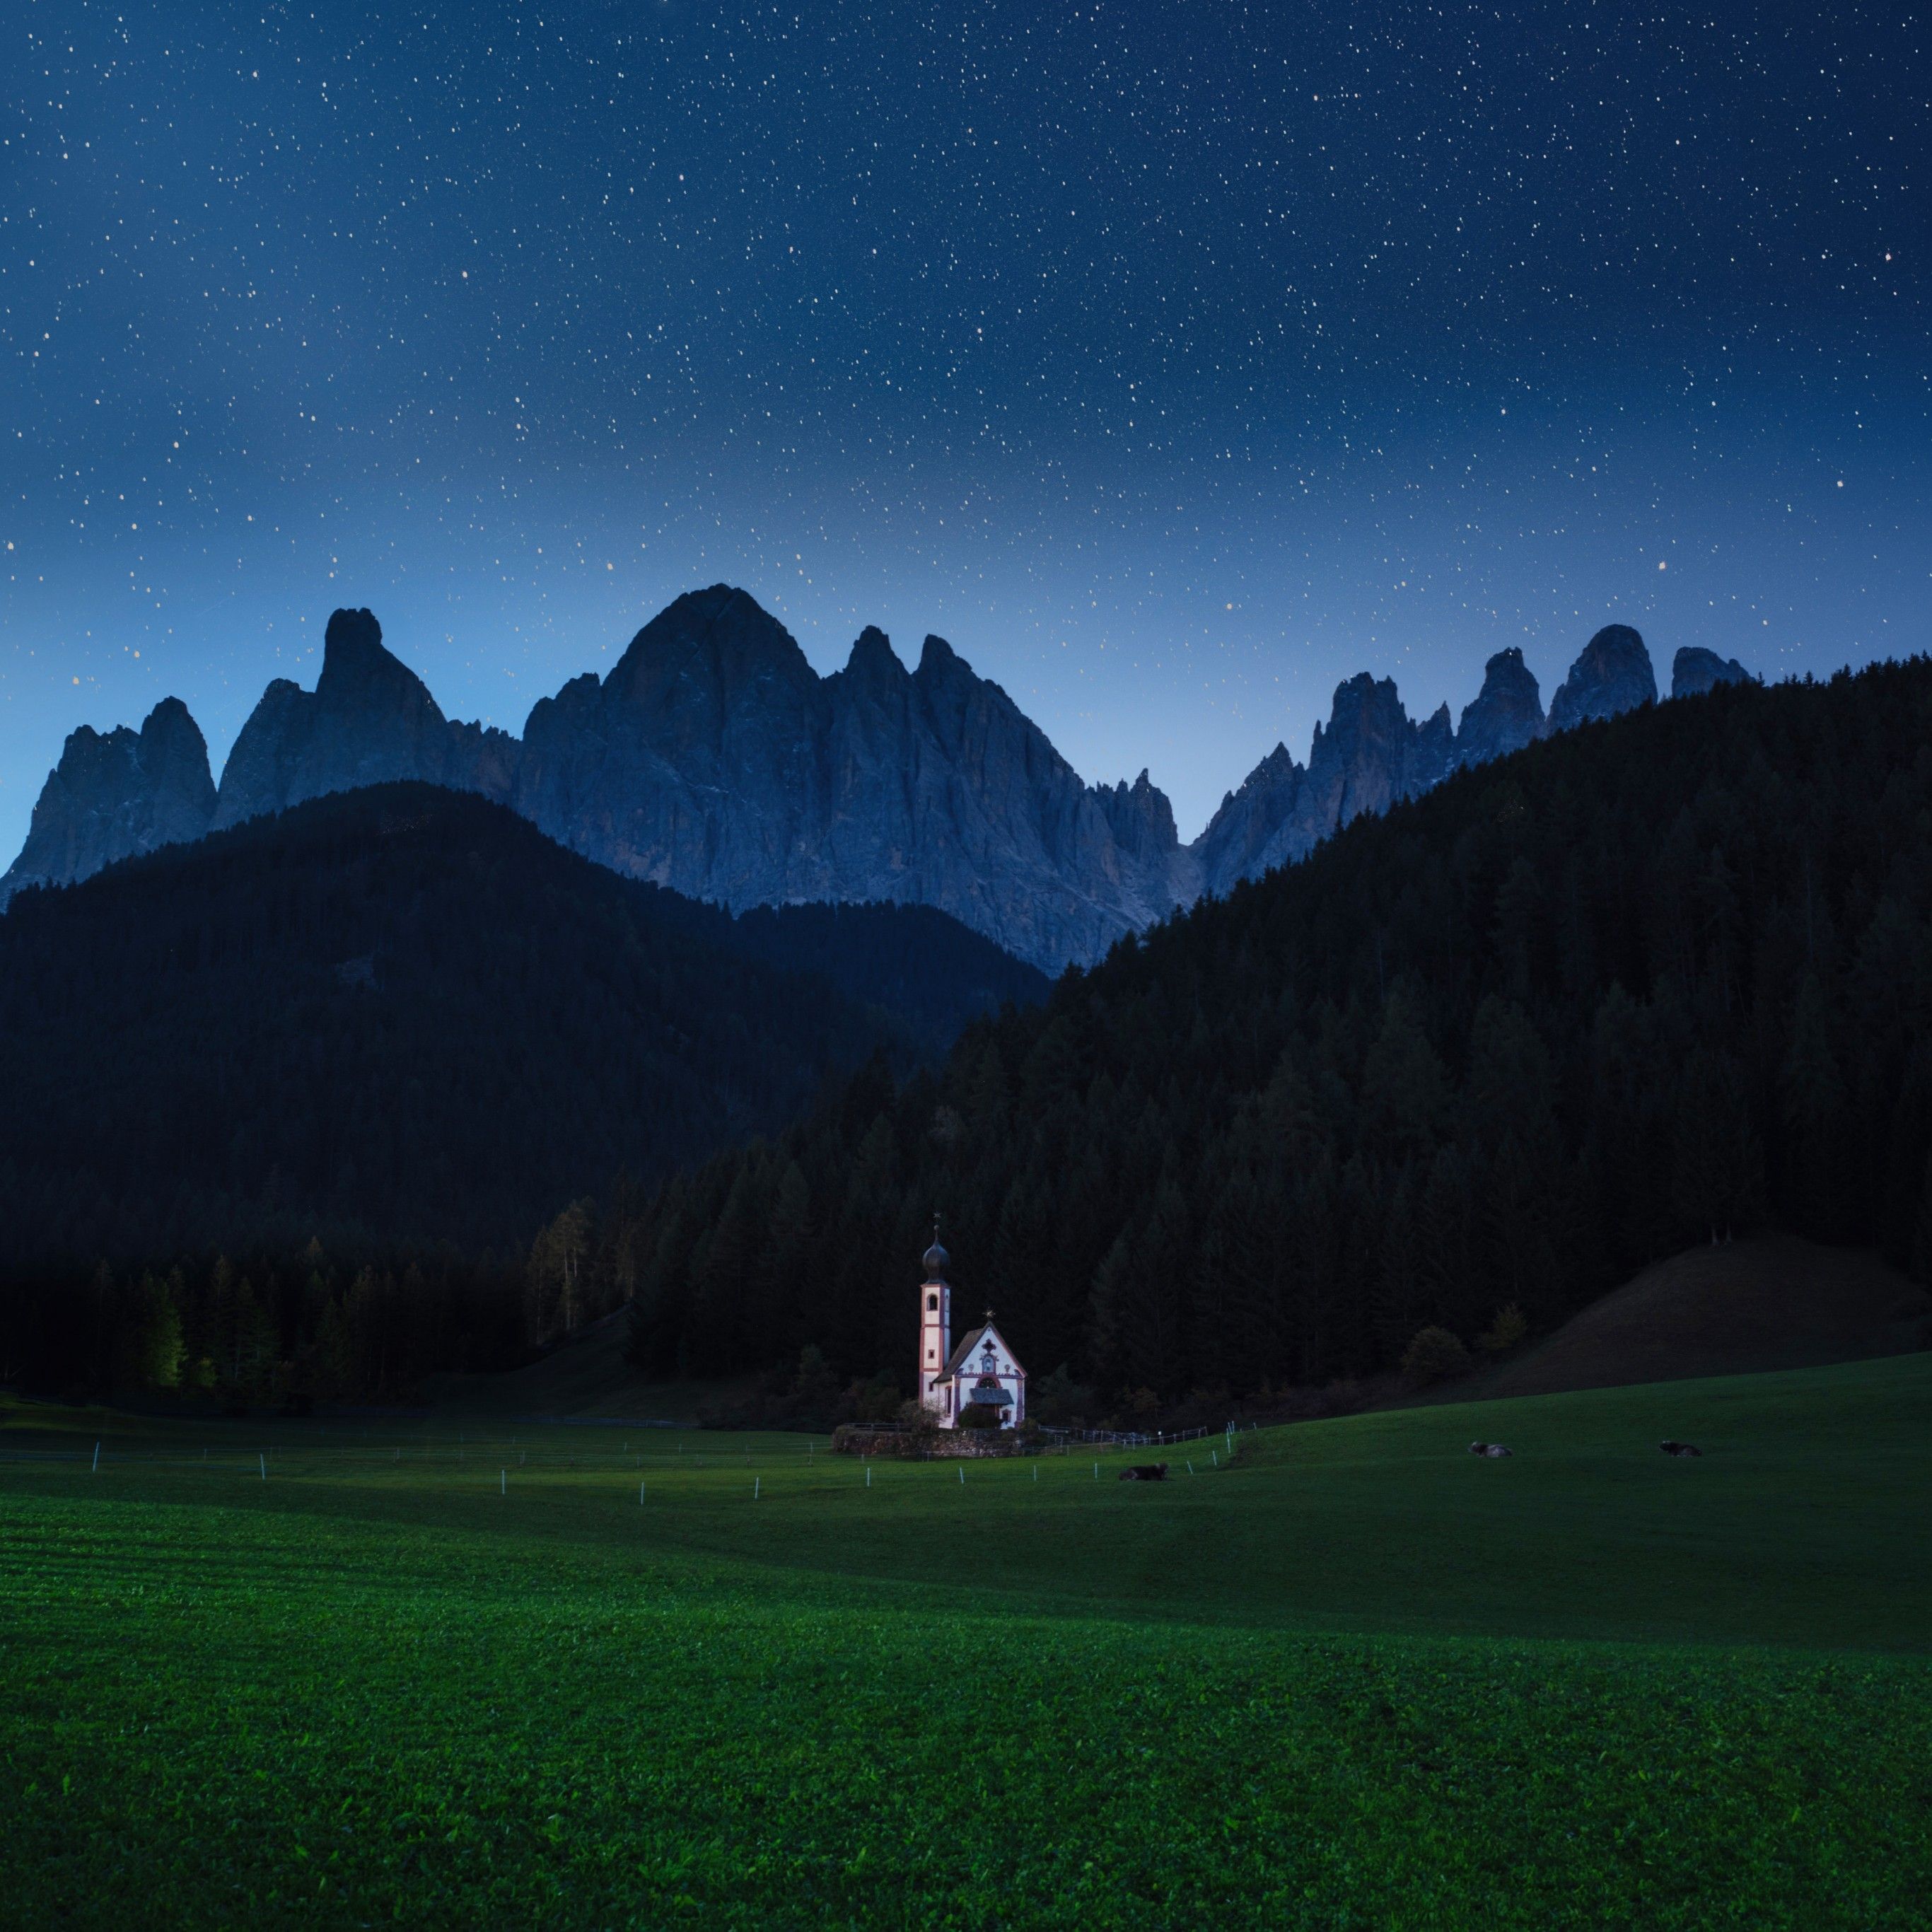 Forest 4K Wallpaper, Mountains, House, Grassland, Countryside, Starry sky, Blue sky, Scenic, Nature